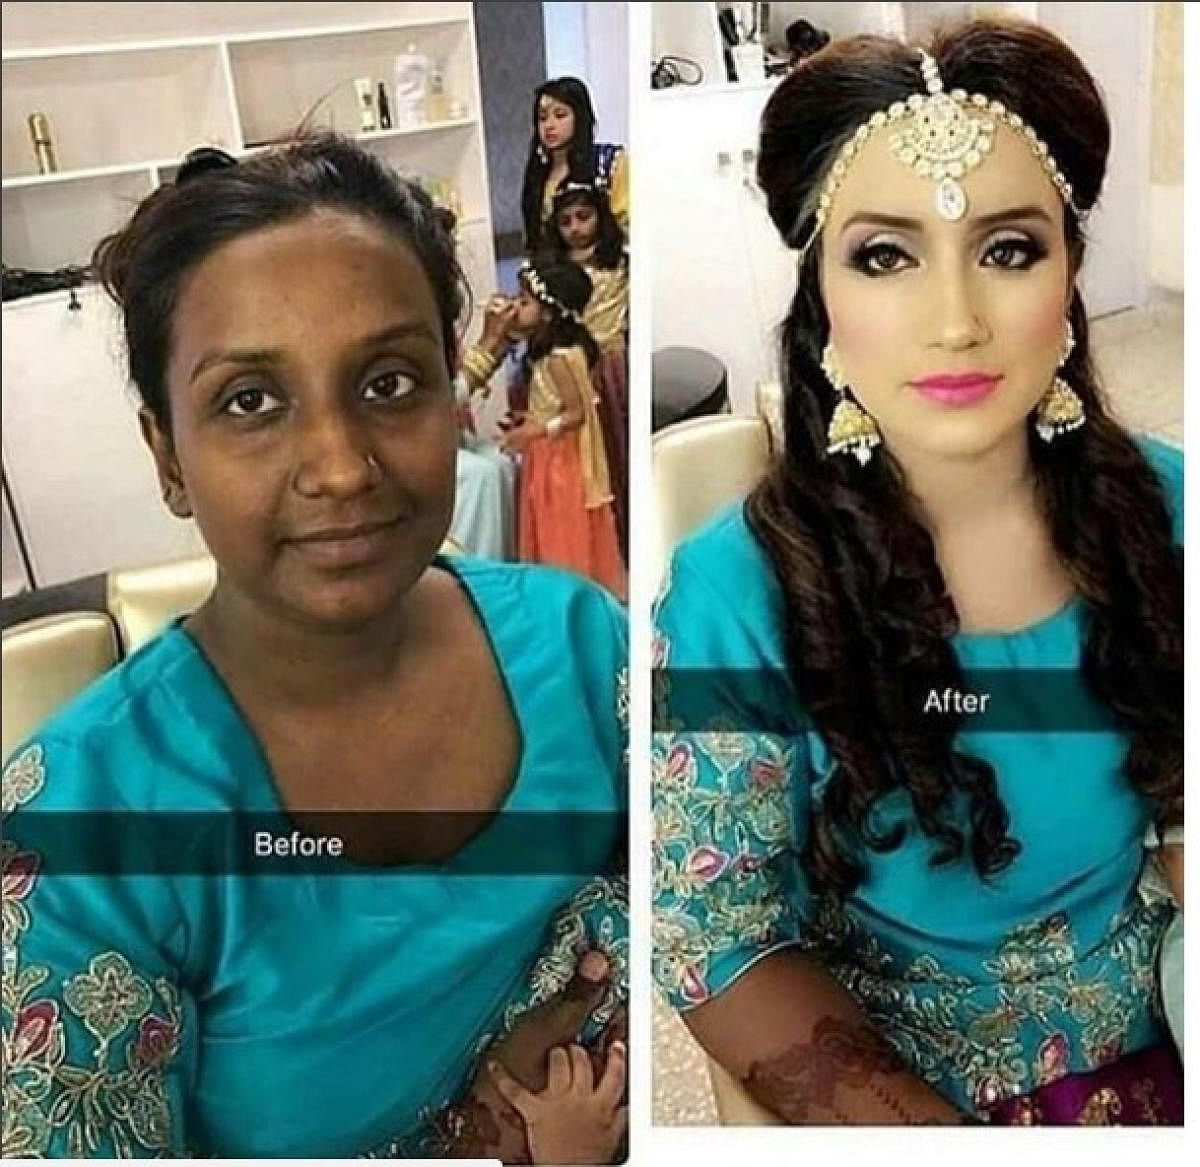 This before and after picture of an Indian bride went viral on social media and became a popular meme template too. Pic courtesy: 9gag.